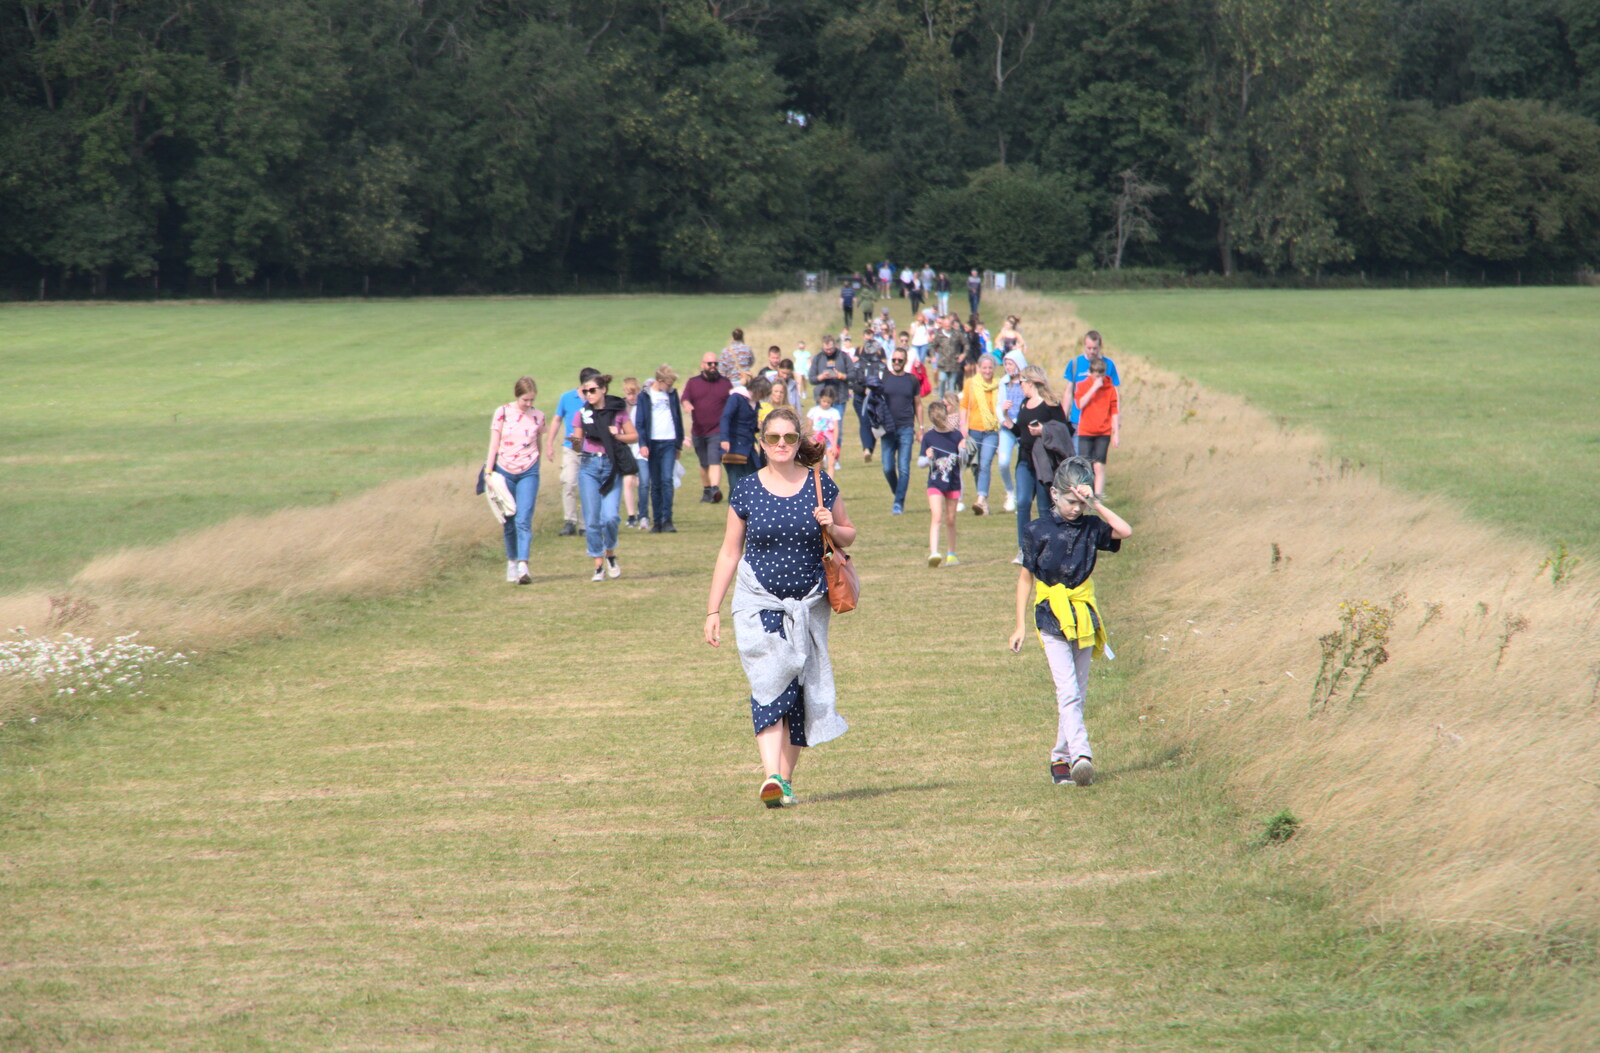 The crowds walk the path past the Cursus from Stone Circles: Stonehenge and Avebury, Wiltshire - 22nd August 2020